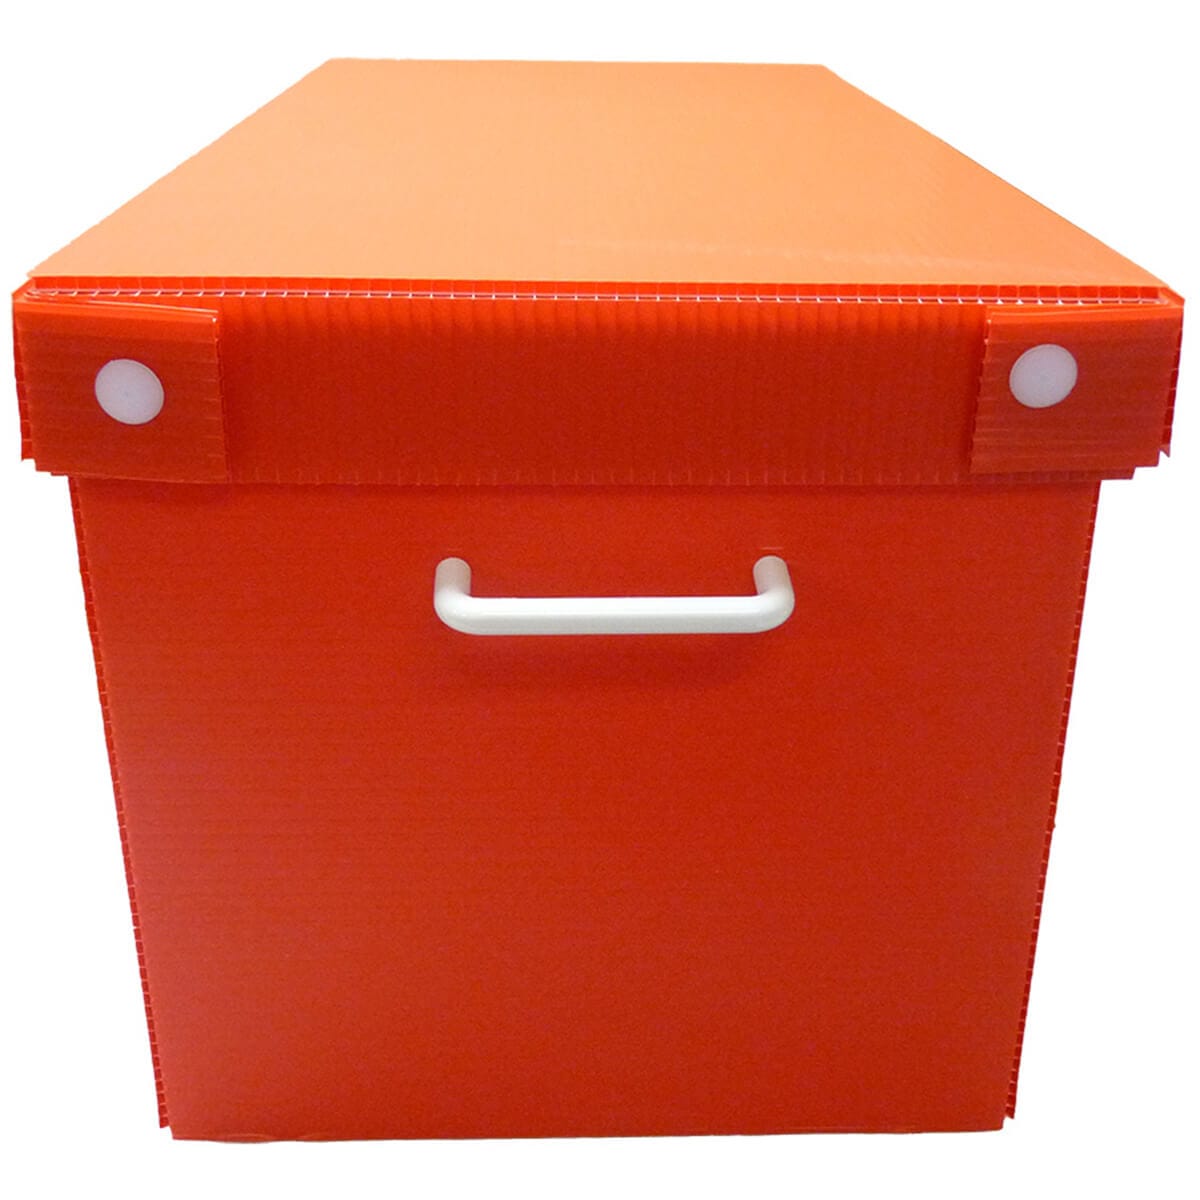 orange storage bin and cover for use with a stand and C&C guinea pig cage